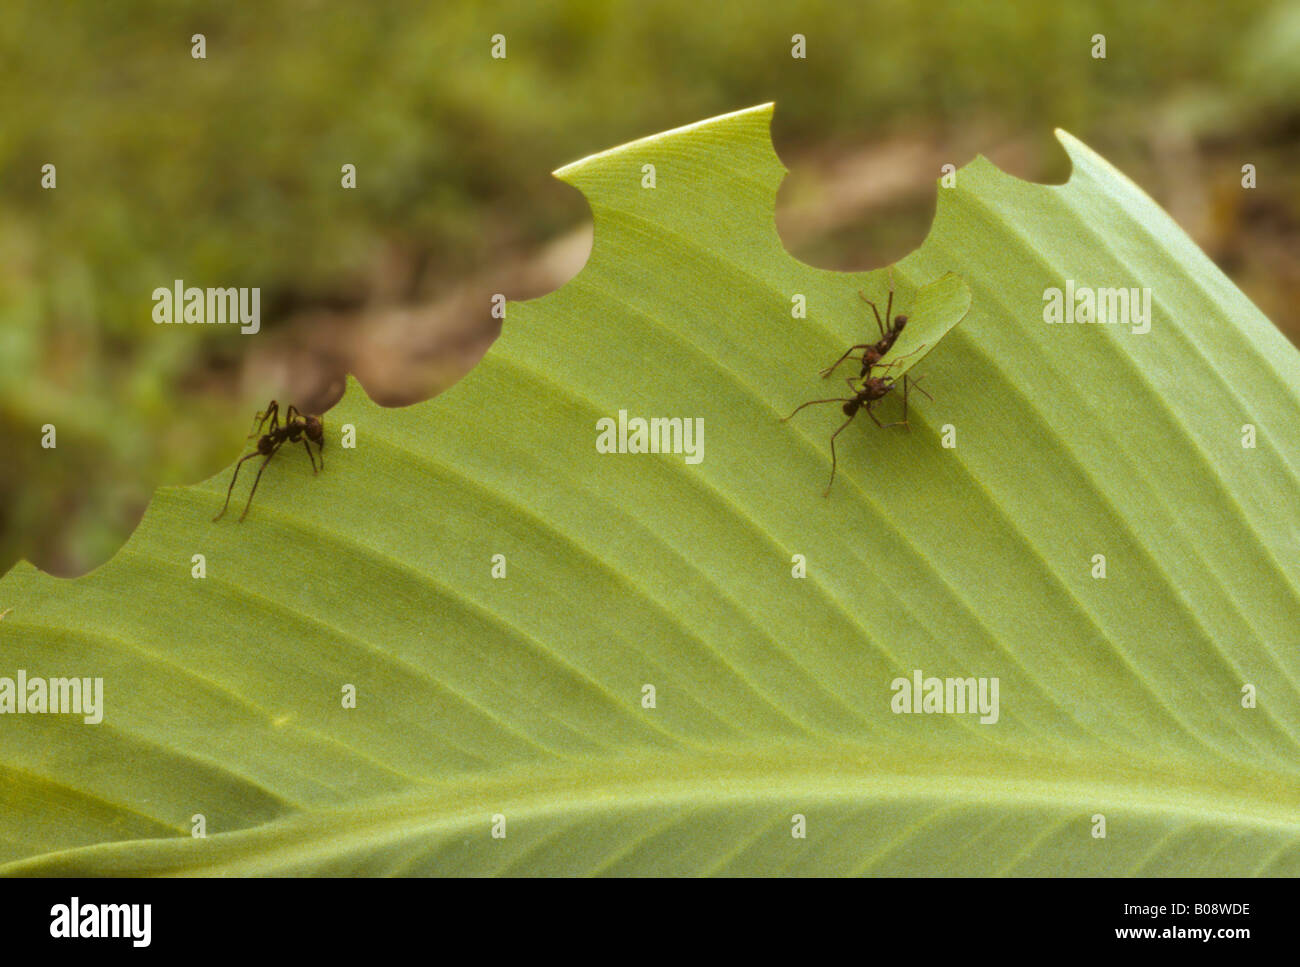 Leaf-cutting Ants or Leafcutters (Atta cephalotes) consuming a leaf, Belize, Central America Stock Photo